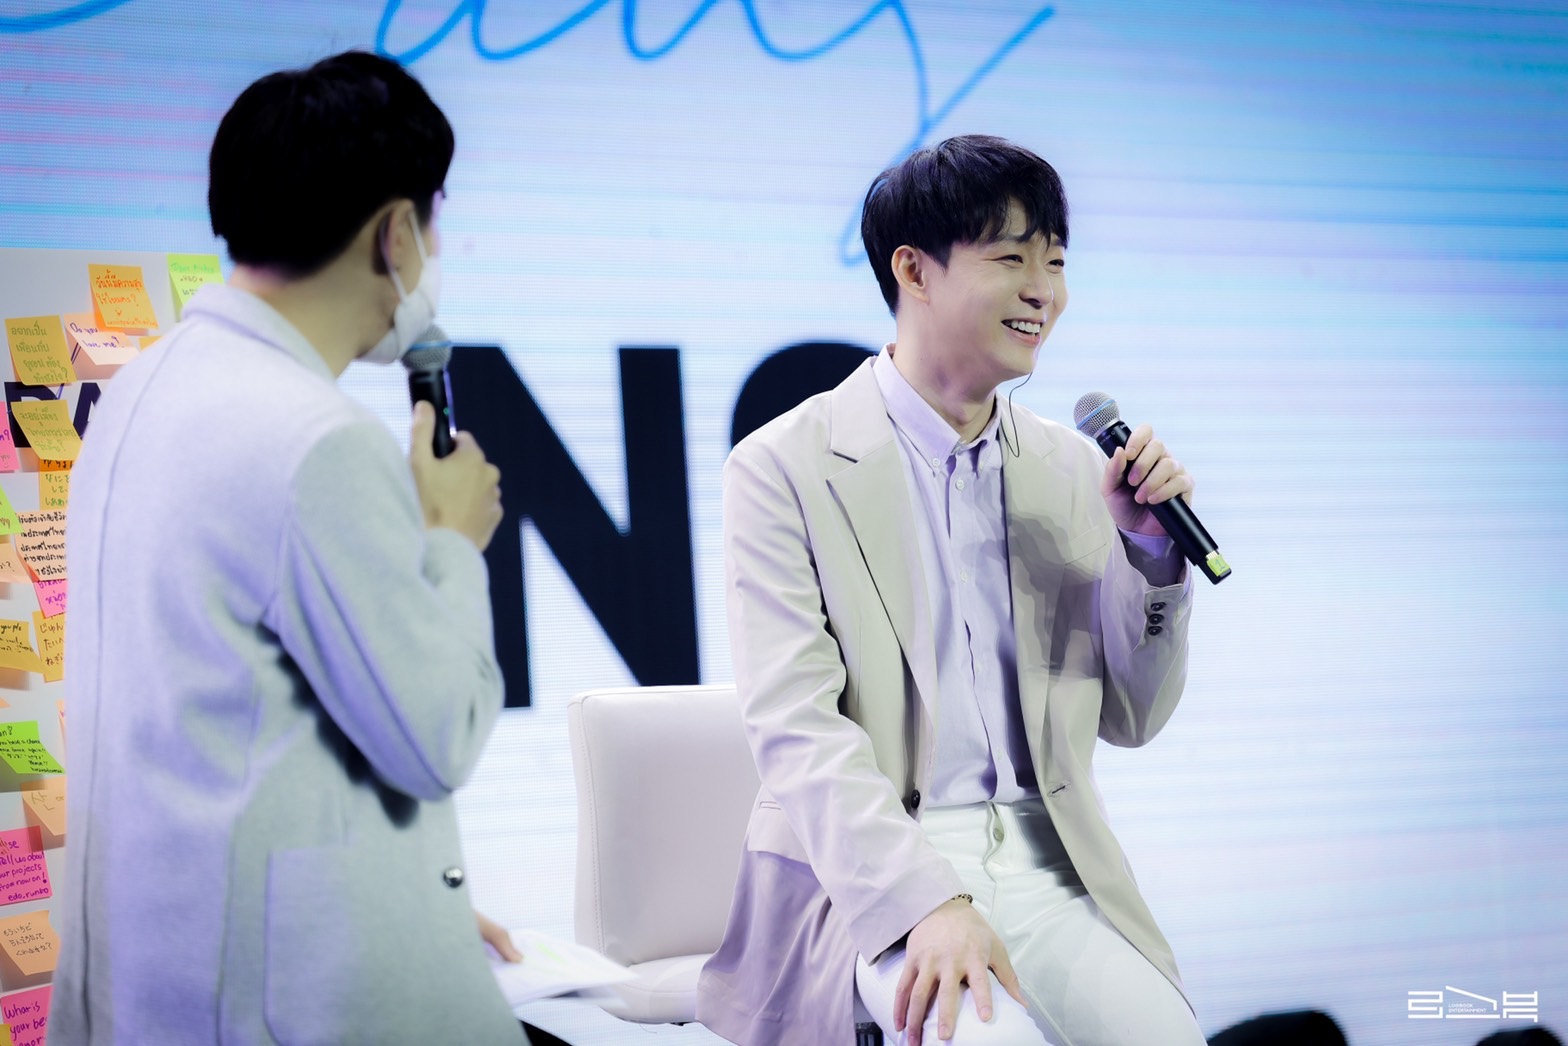 2022 LOGBRIDGE “YU AND YOUR DAY” FAN – CON Celebrate his birthday together with Park Yu Chun